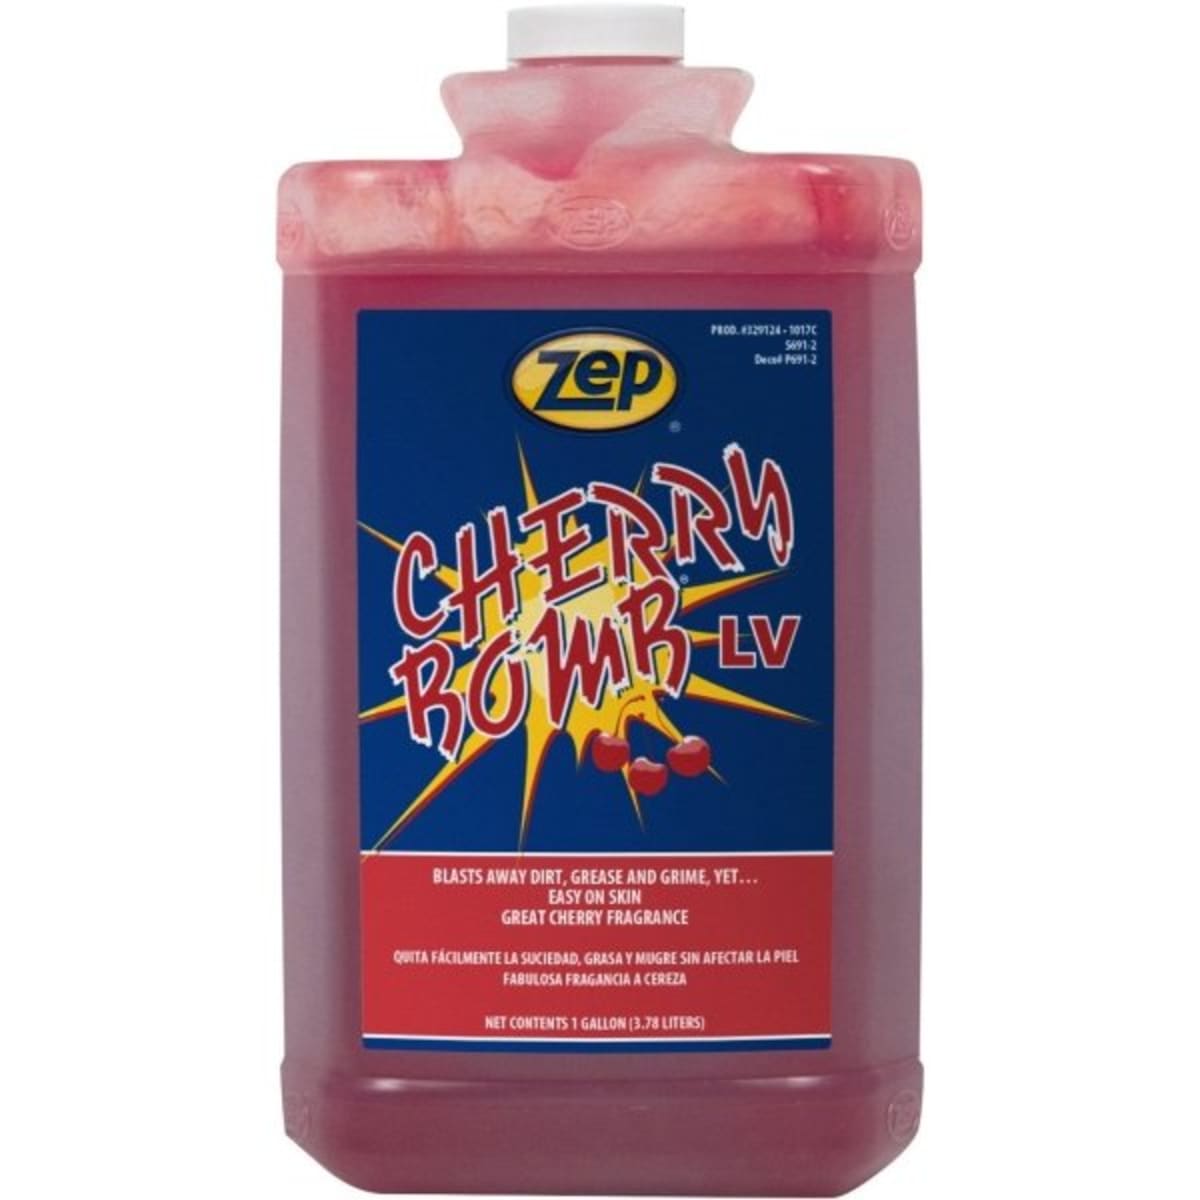  Zep Cherry Bomb Hand Cleaner 48 ounce (Case of 4